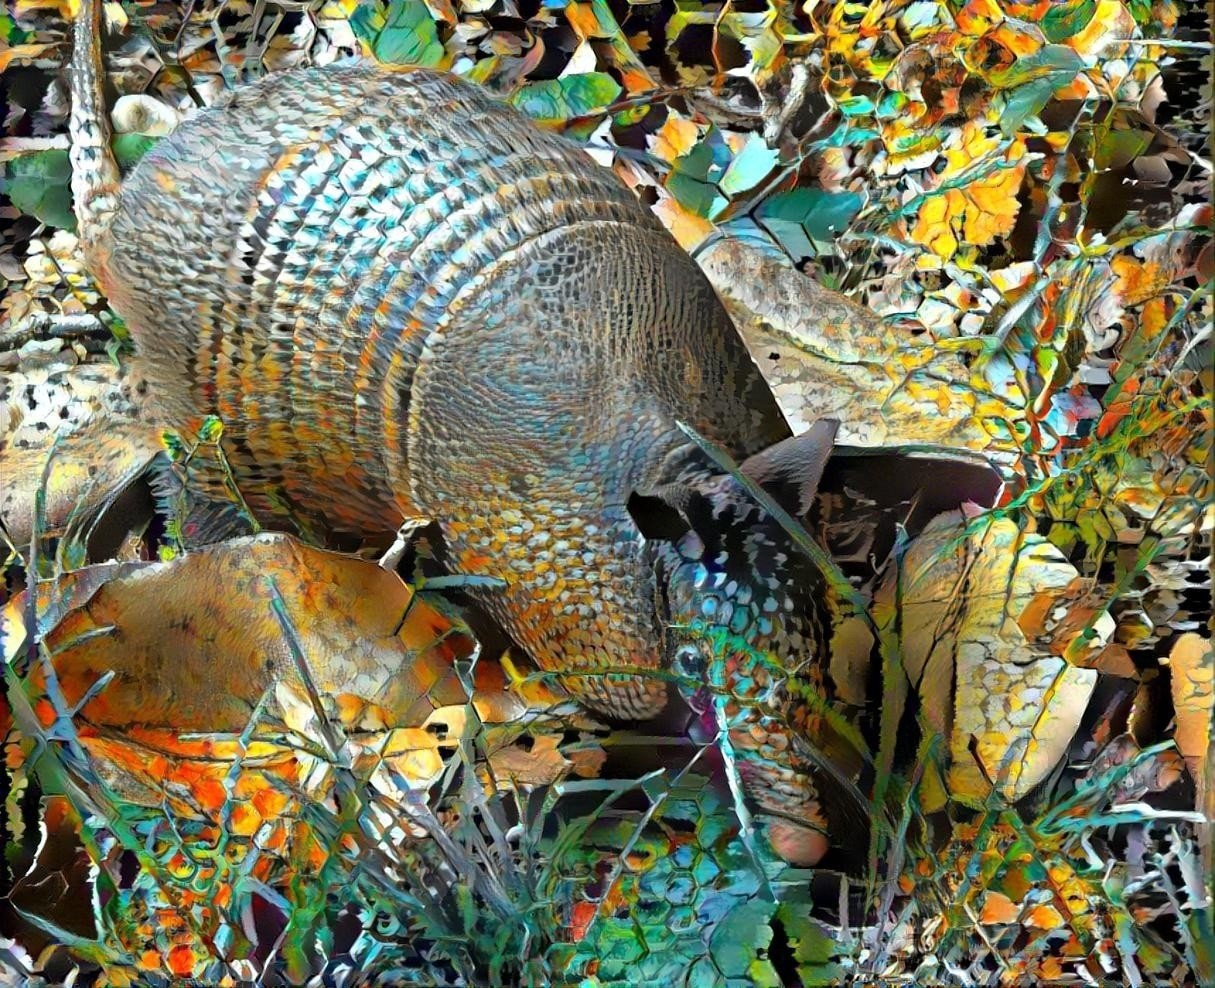 Huech (or Tatú) - a sacred animal for the ancient Maya - trundling through my backyard as a humble armadillo. Style and inspiration provided by Claudio (thank you)..